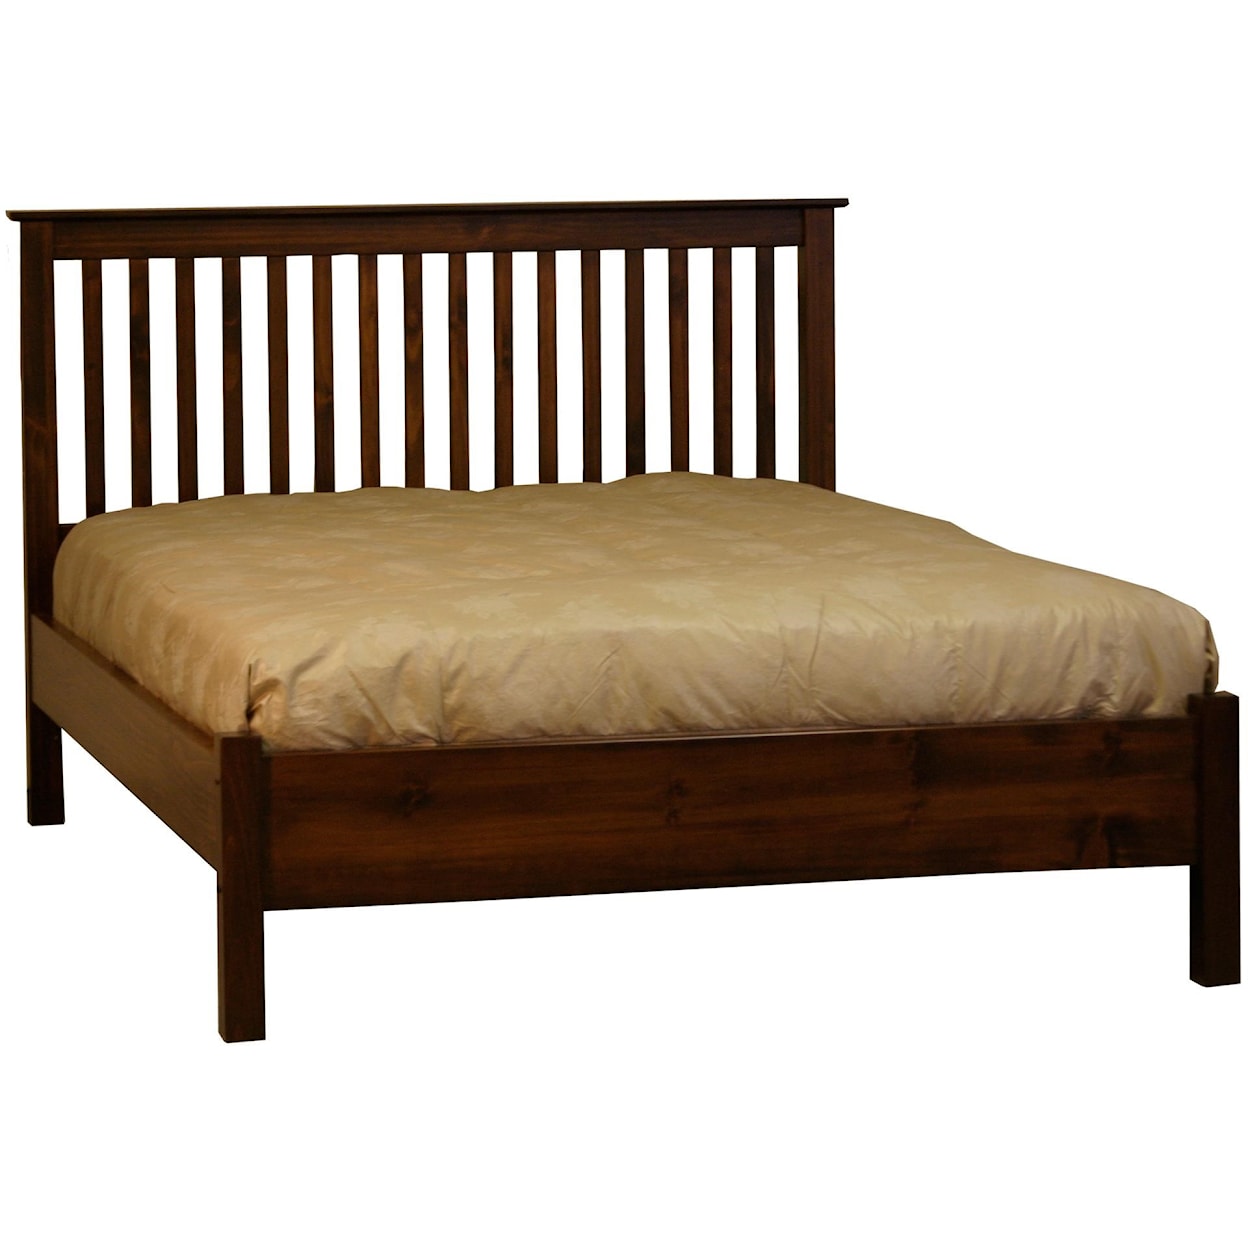 Dealer Brand Polo Mahogany Queen Bed